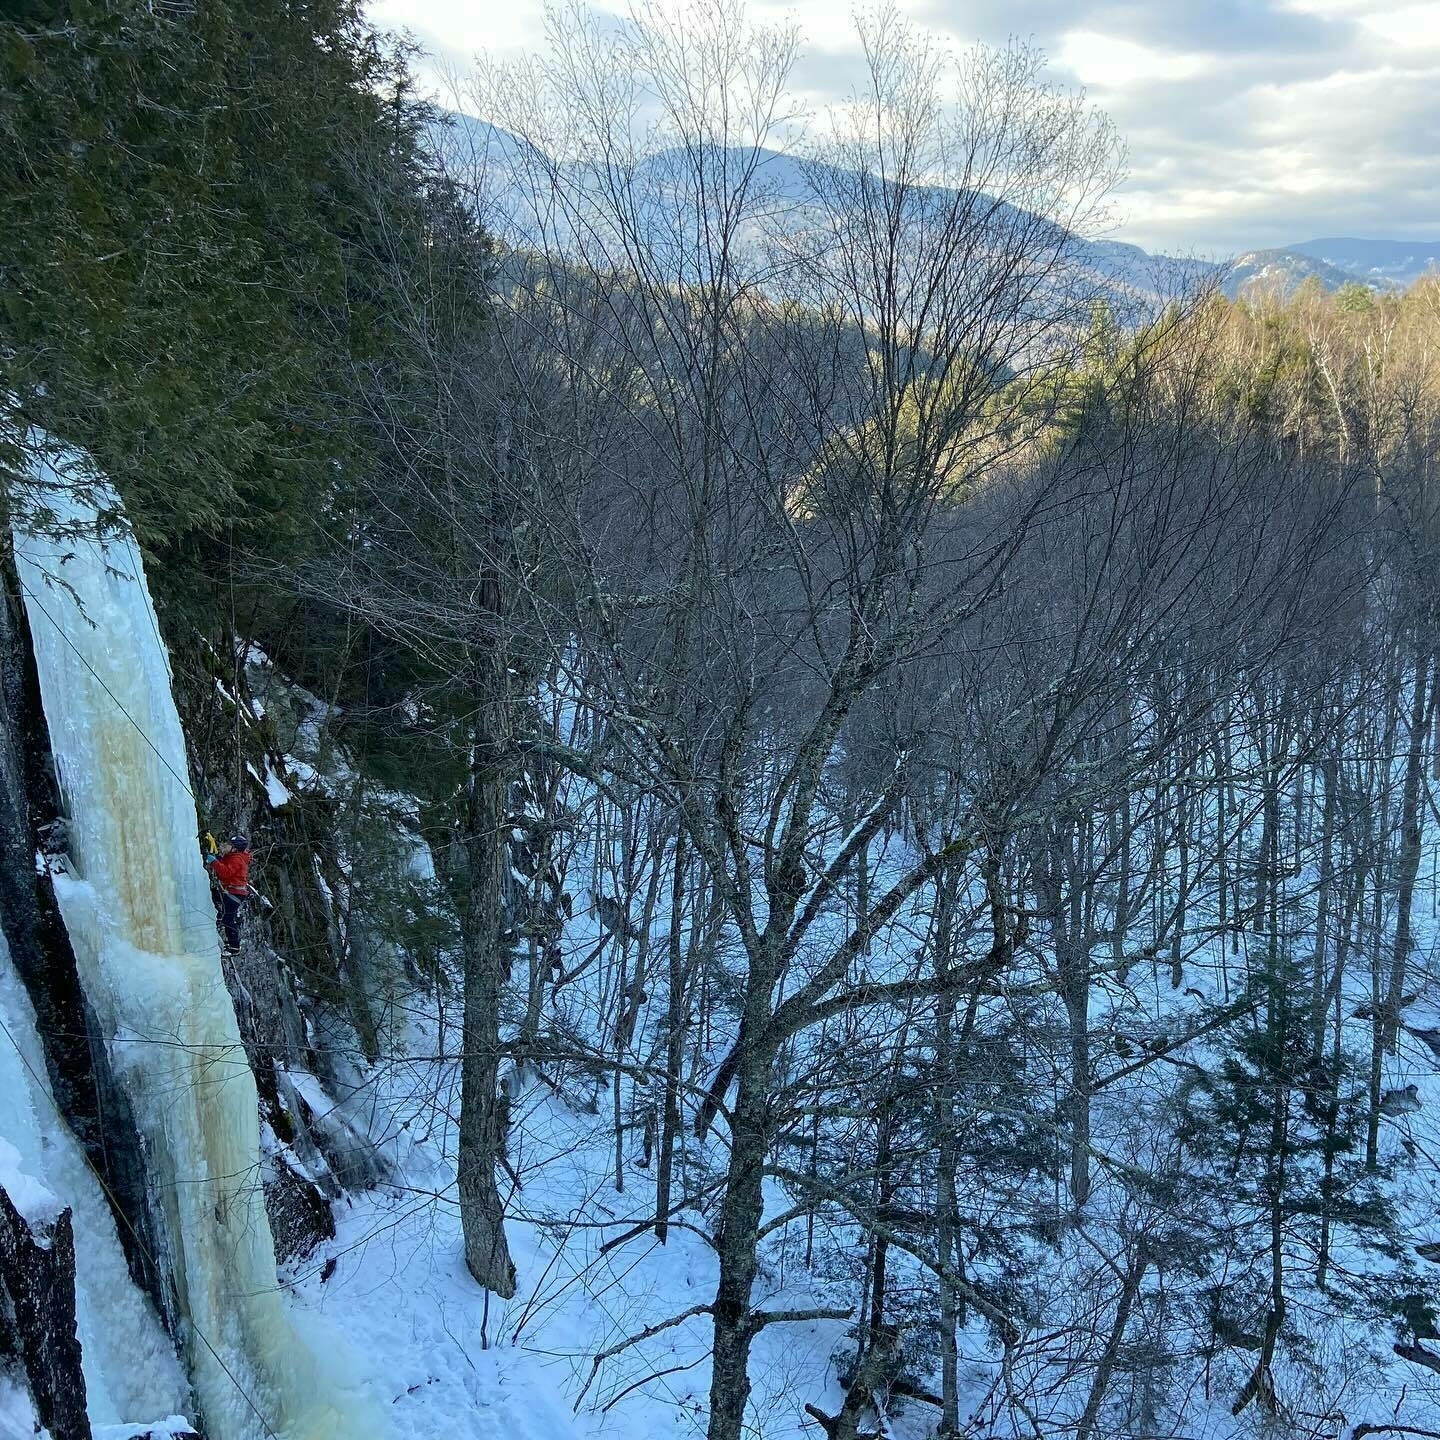 A person is ice climbing on a frozen waterfall amidst a snow-covered forest with mountainous terrain in the background.